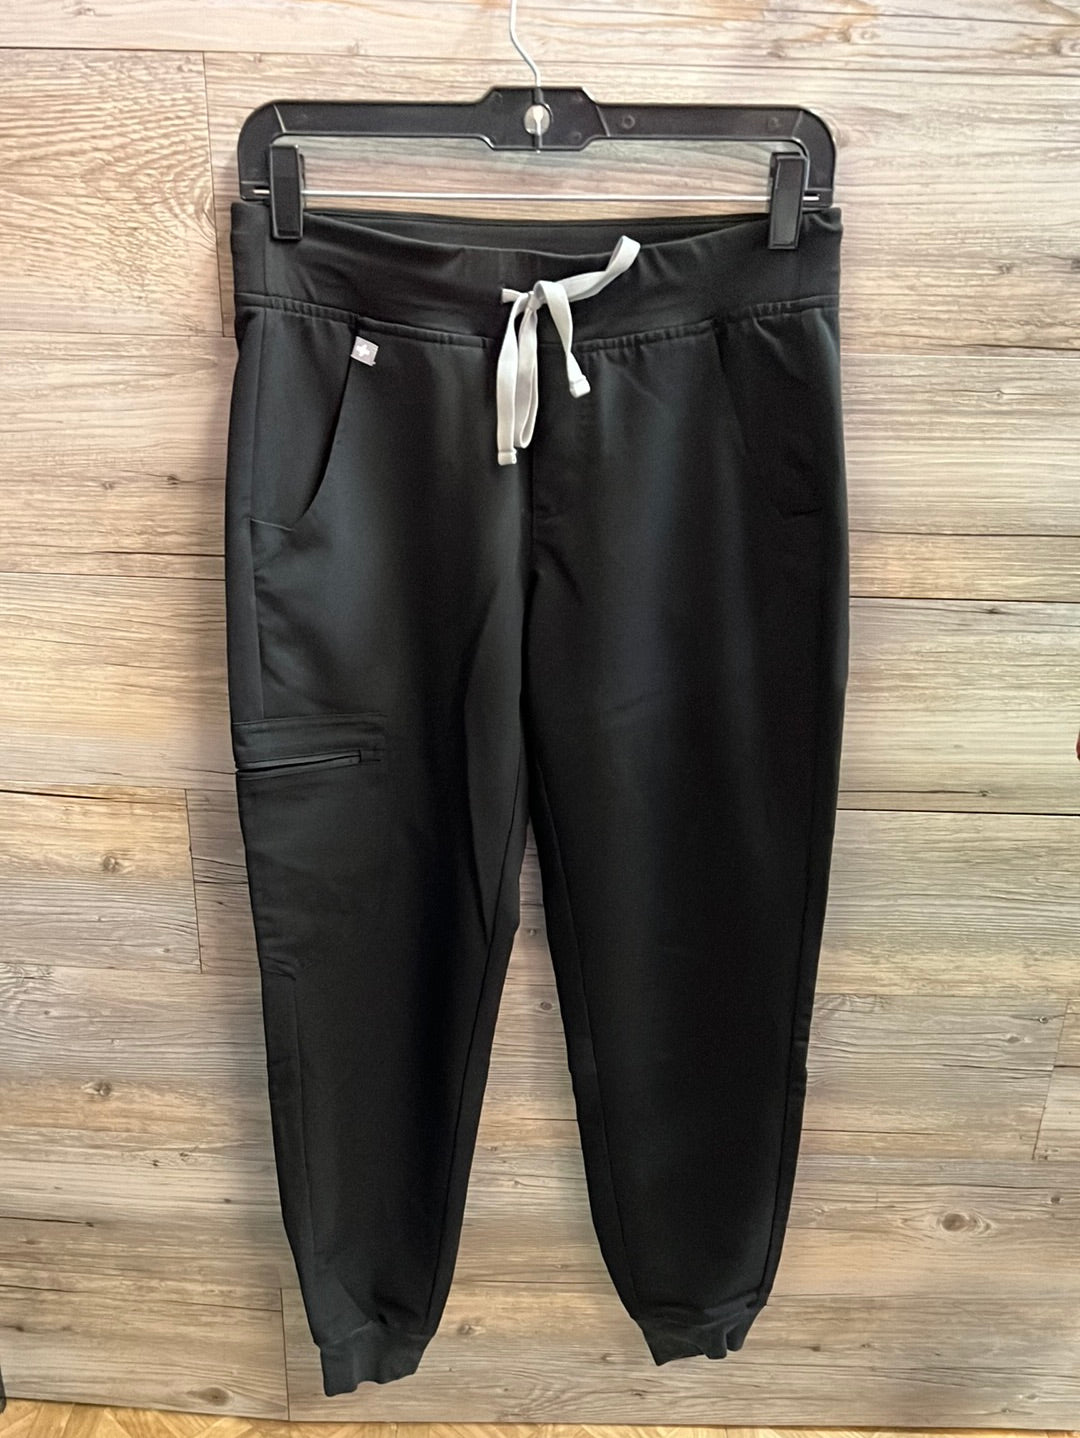 Figs Technical Collection Pants Blk, Size XS